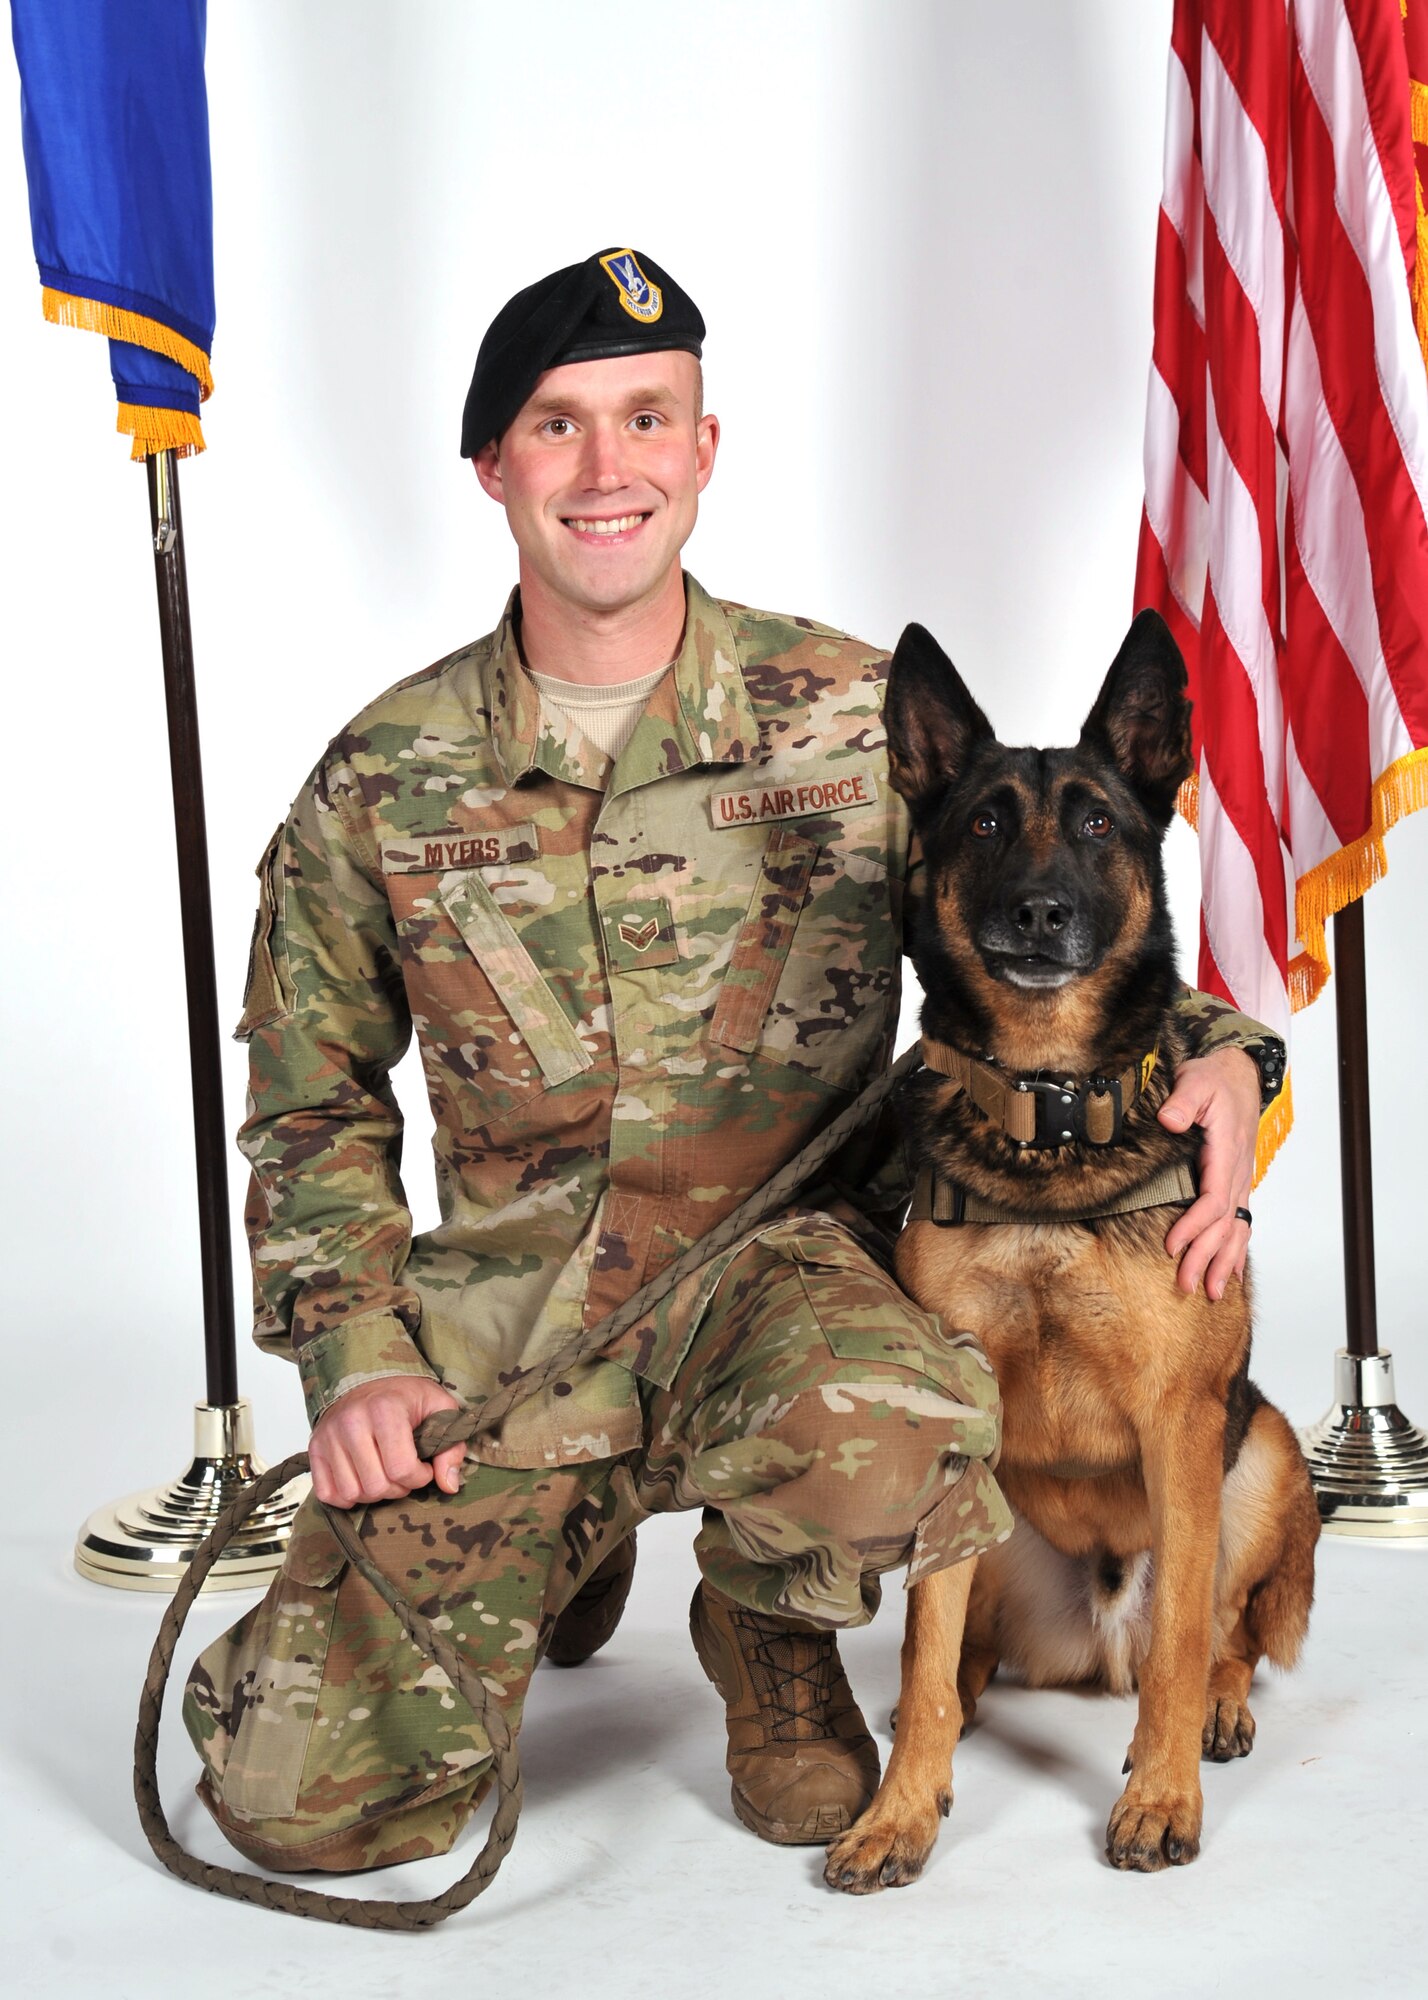 U.S. Air Force Senior Airman Shane Myers, 17th Security Forces Squadron military working dog handler, poses with Hugo, his K-9 partner, for a photo at the photo studio on Goodfellow Air Force Base, Texas, Jan. 8, 2019. Myers and Hugo have been training together since Myers arrived on Goodfellow in Oct. 2018. (U.S. Air Force photo by Senior Airman Seraiah Hines/Released)